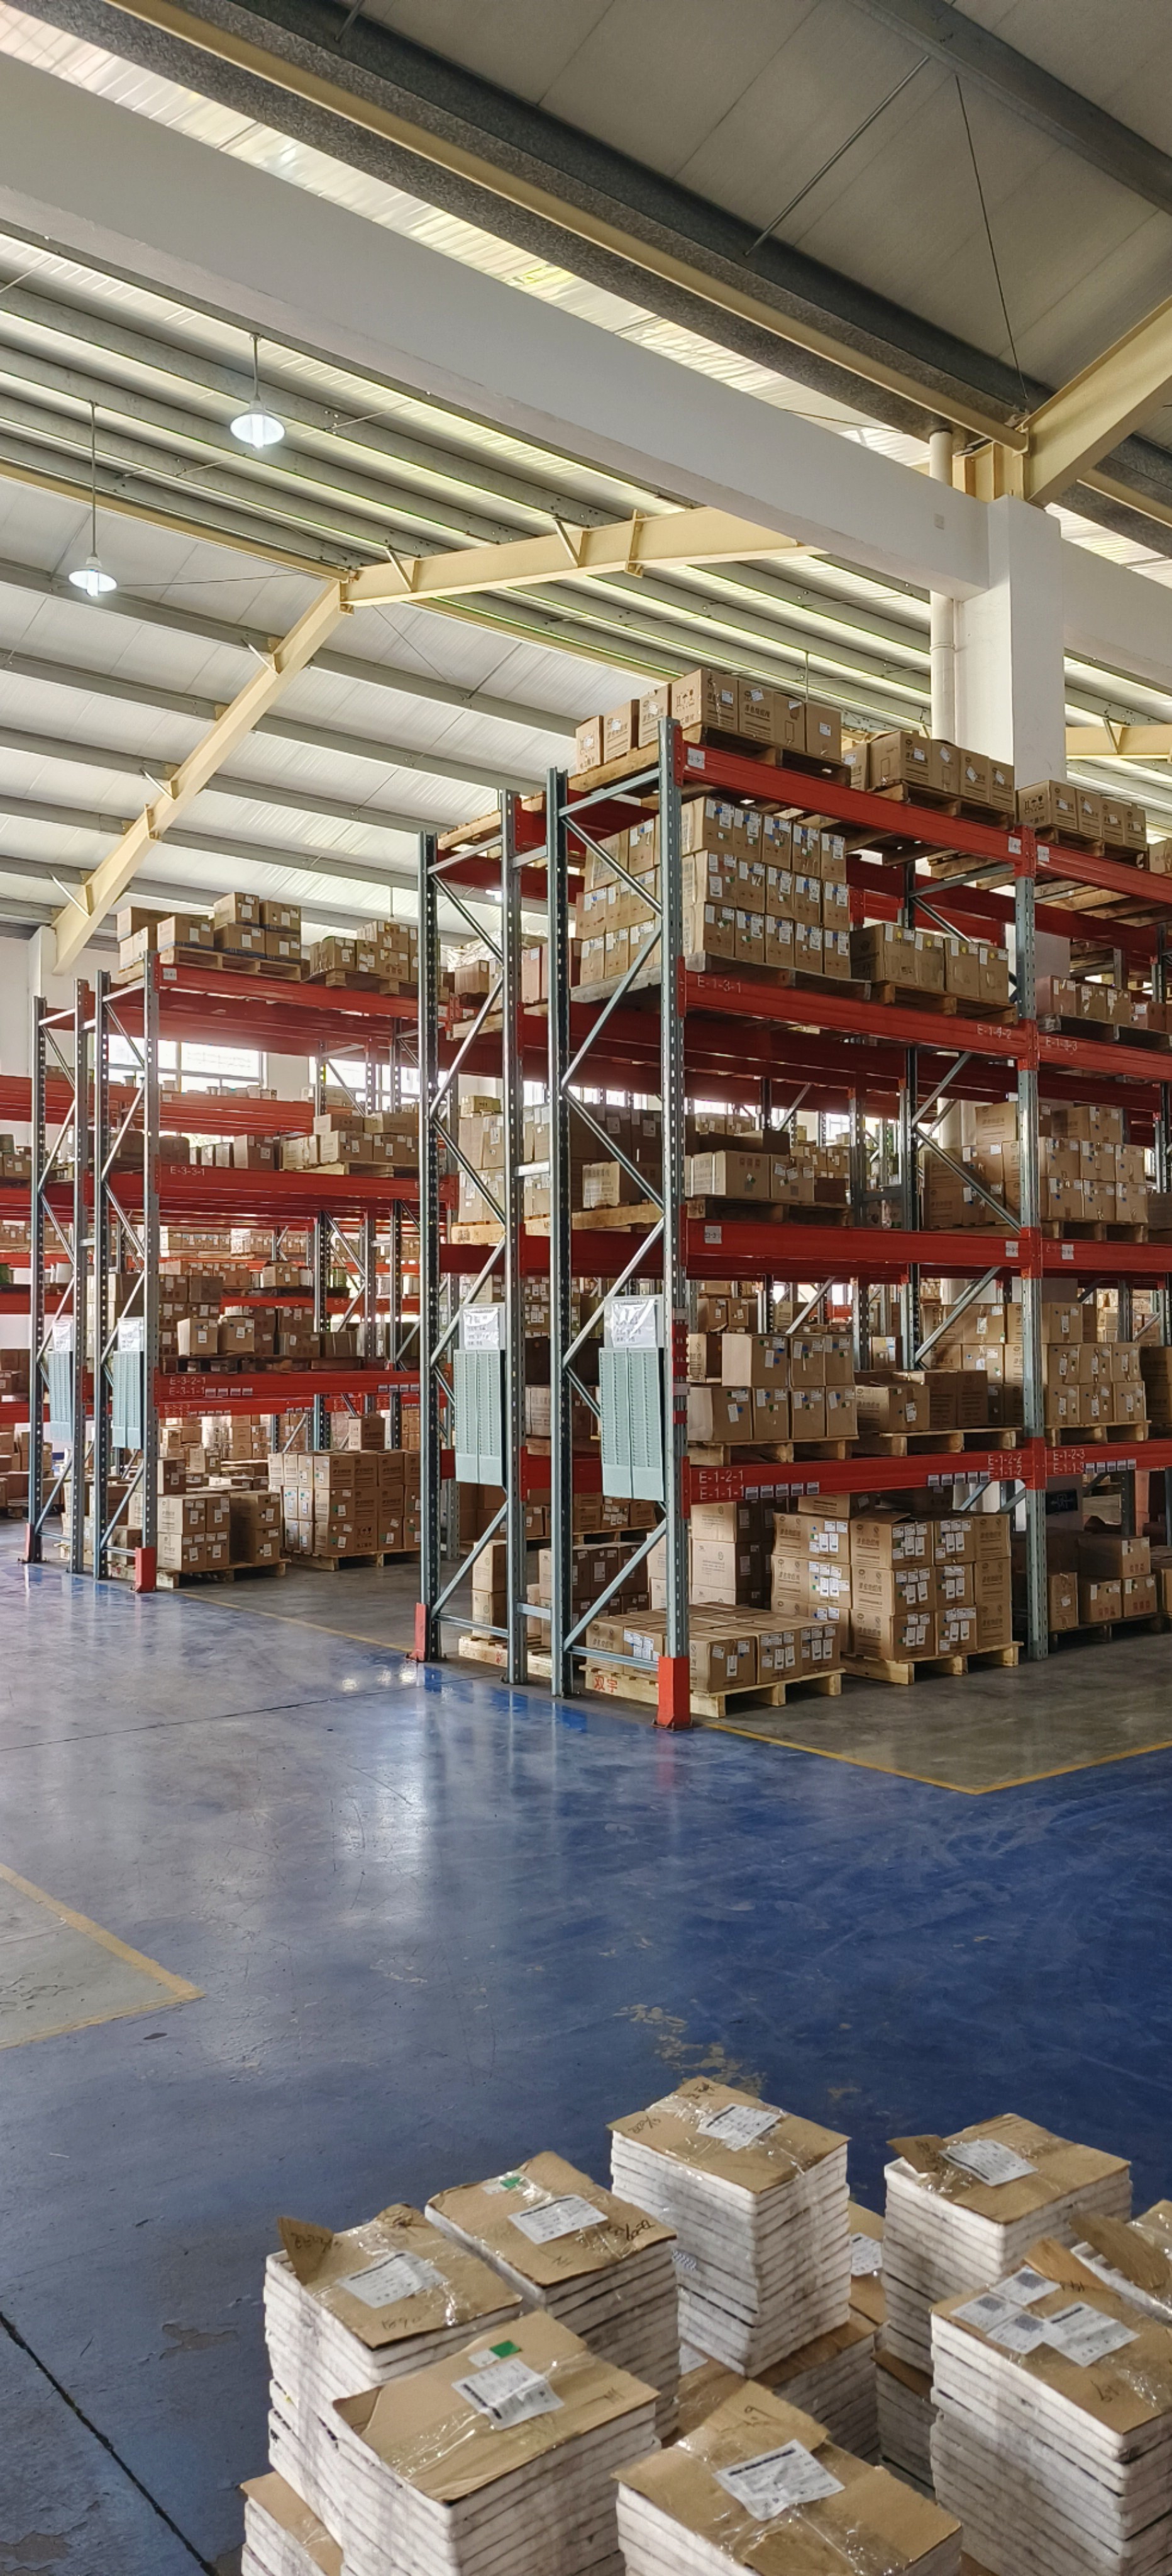 The warehouse shelves and cargo storage racks are made of good materials and can carry most of the specifications that can be customized